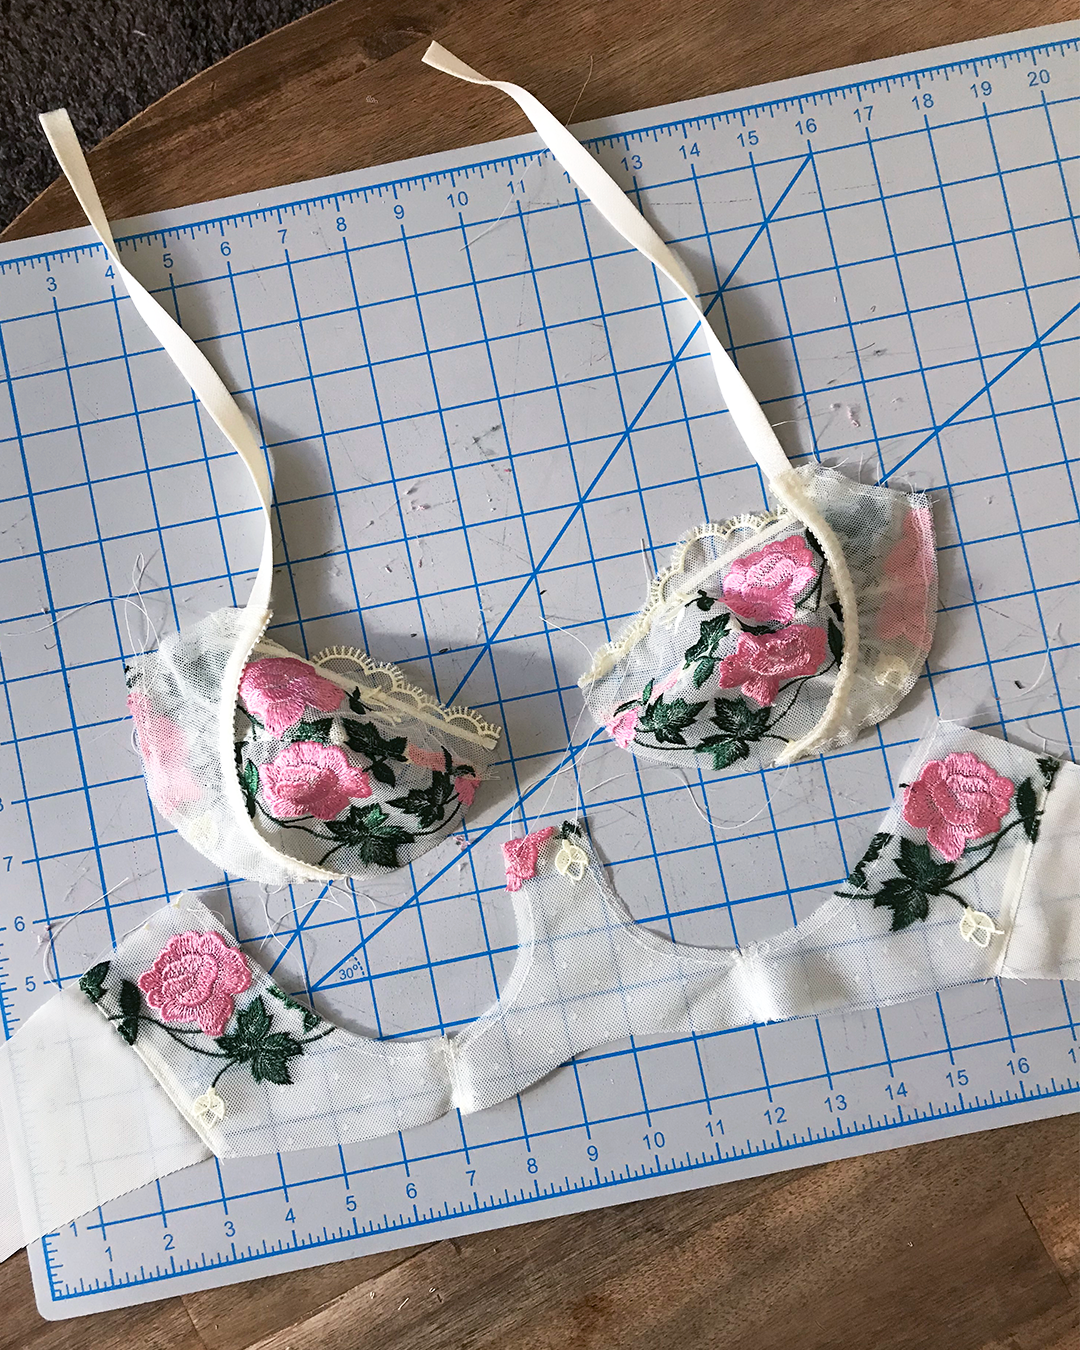 Black Beauty Bra View B Sew-Along // Part Nine: Sewing – Cups into Frame –  Tailor Made Blog